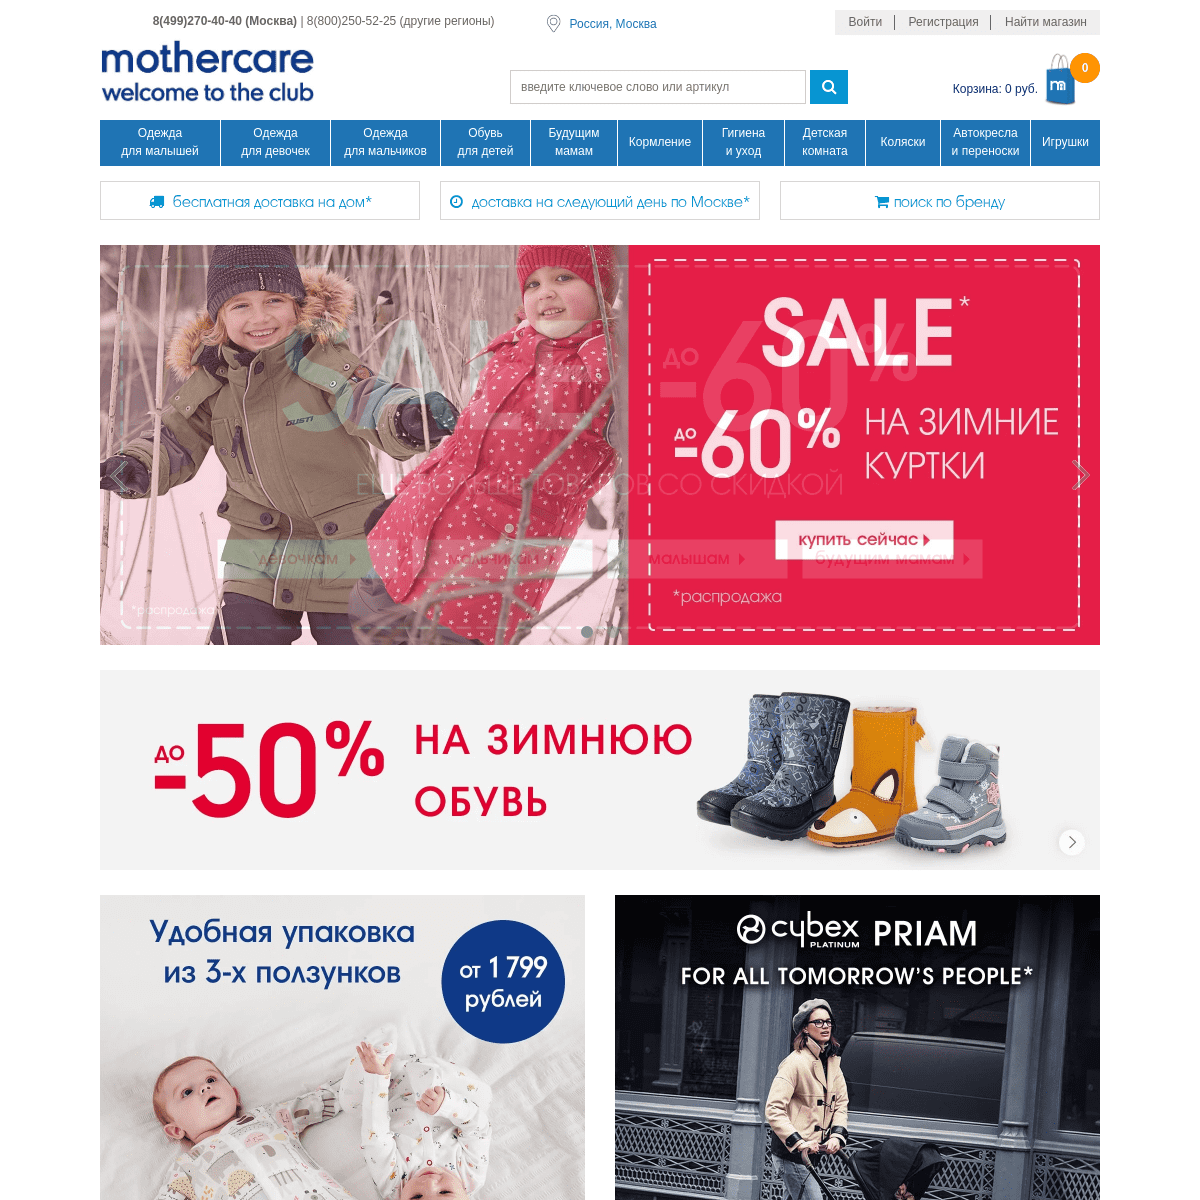 A complete backup of mothercare.ru